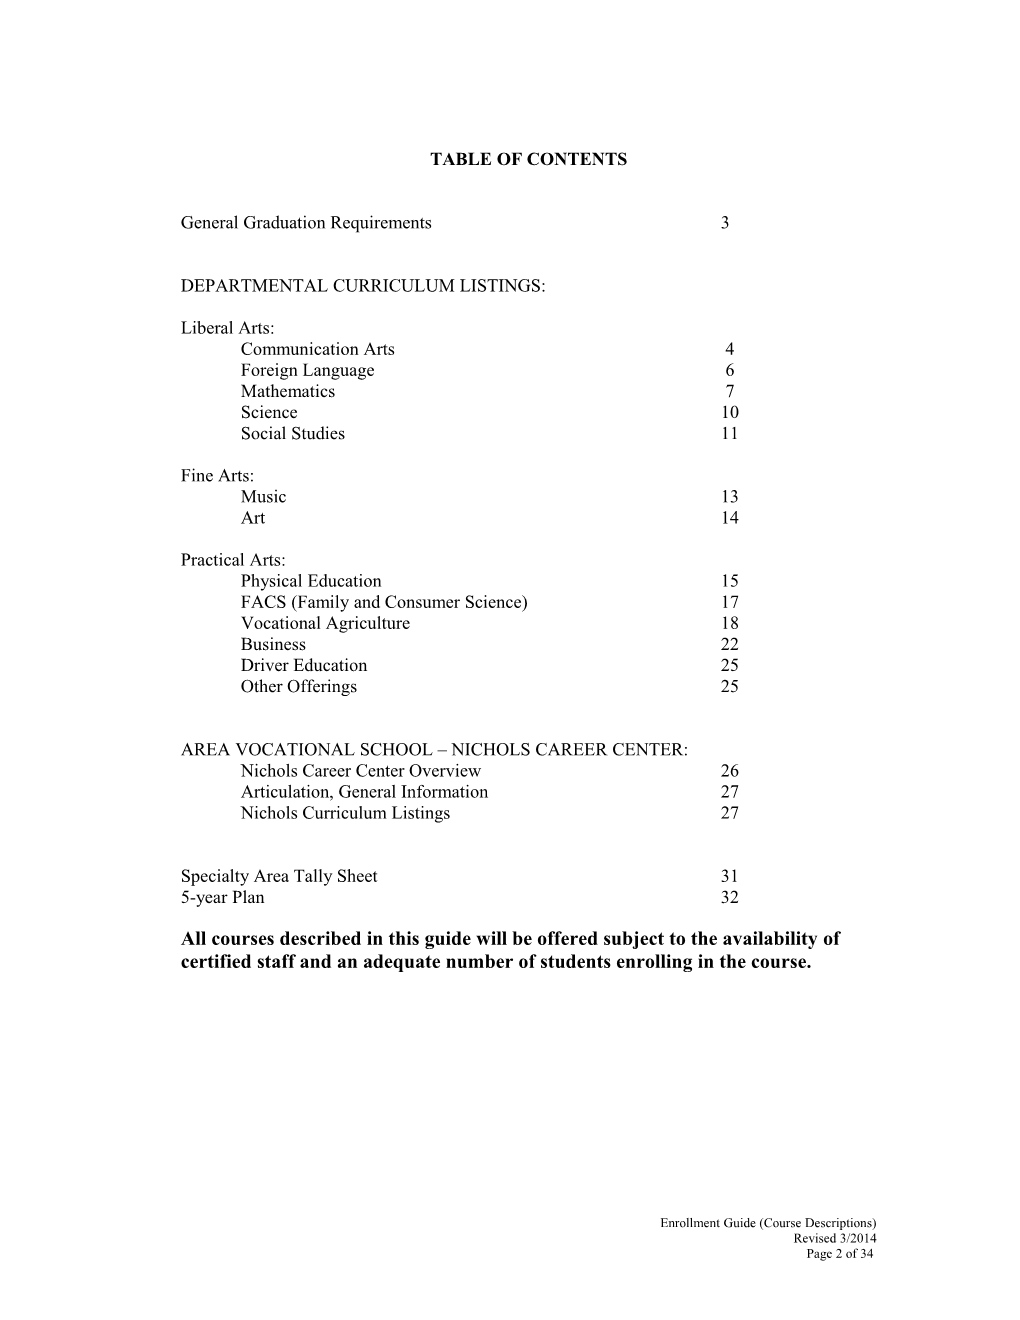 Table of Contents s346